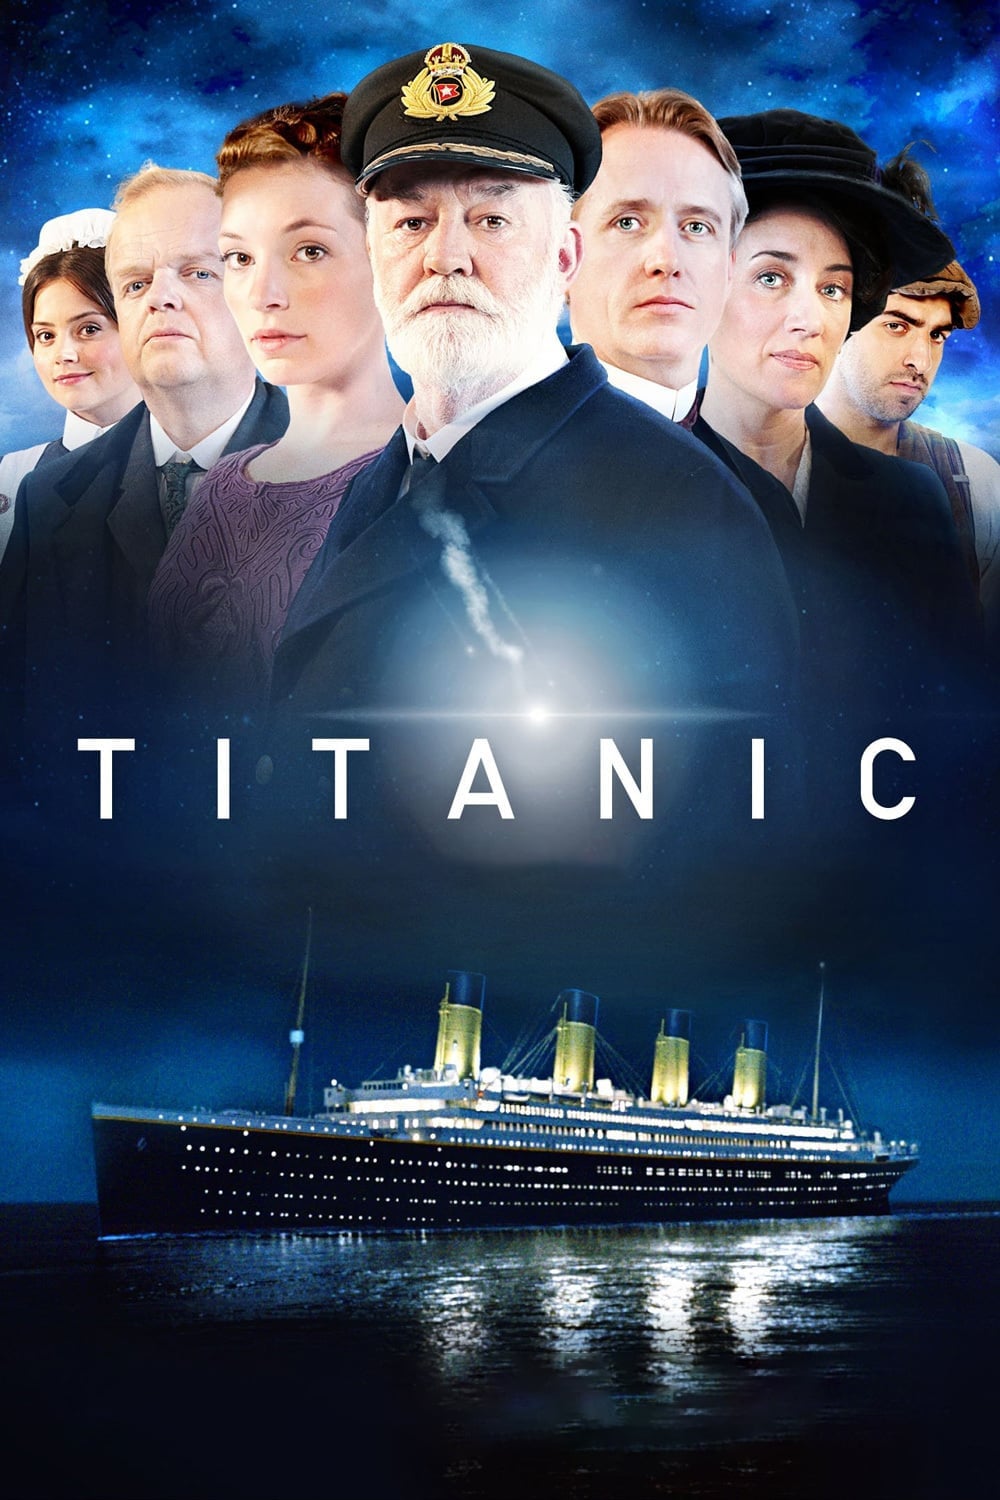 Titanic TV Shows About 1910s